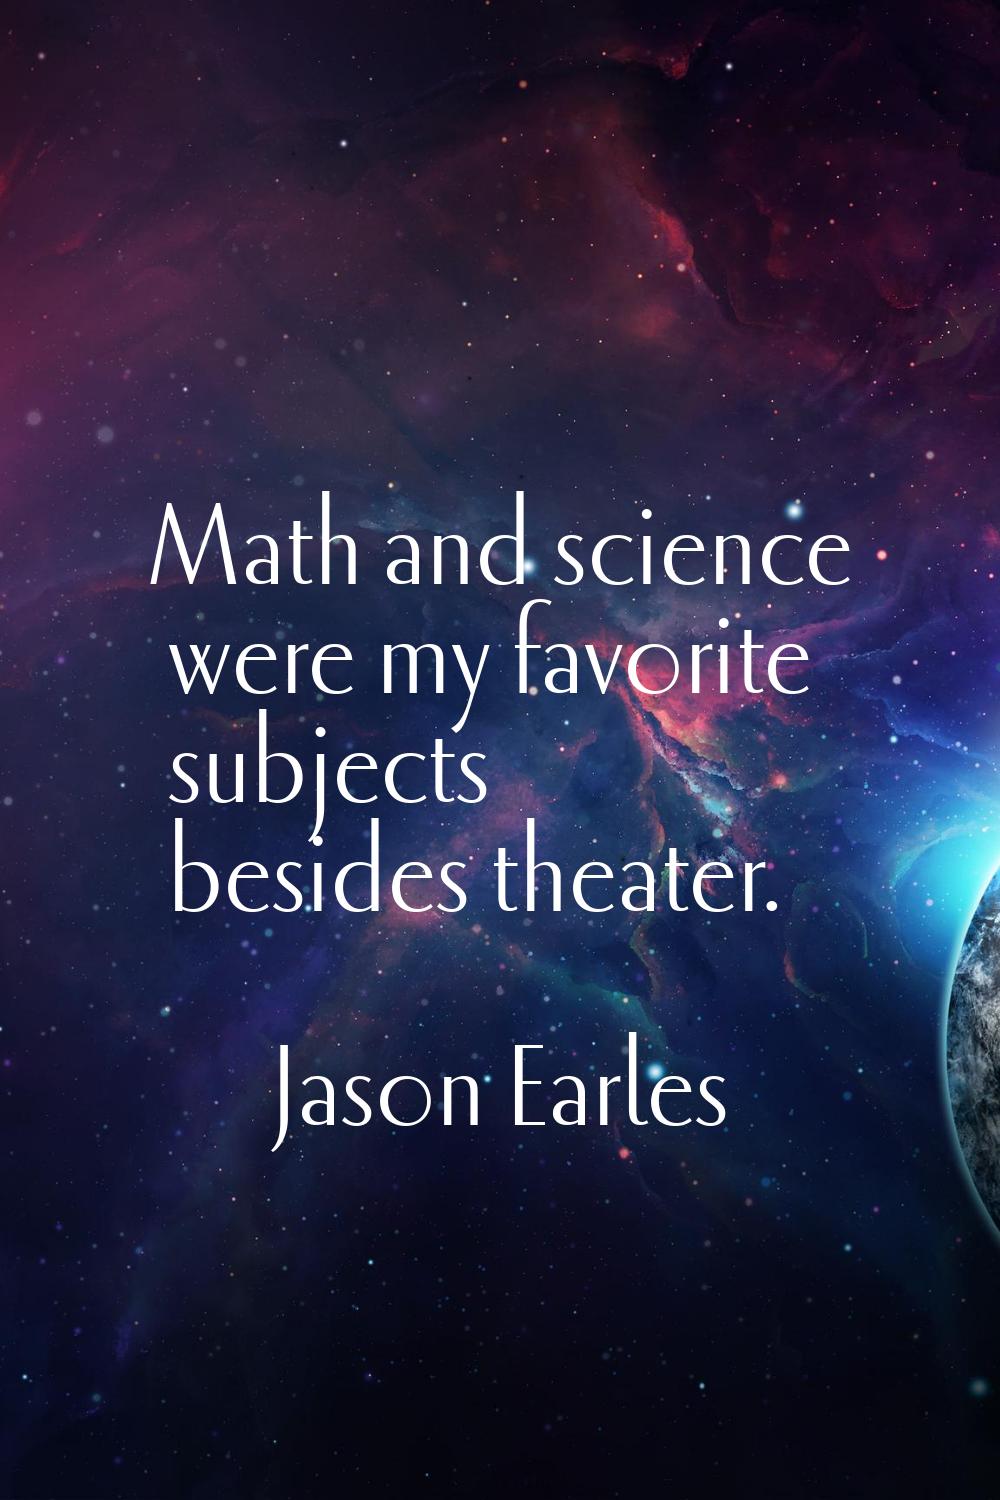 Math and science were my favorite subjects besides theater.